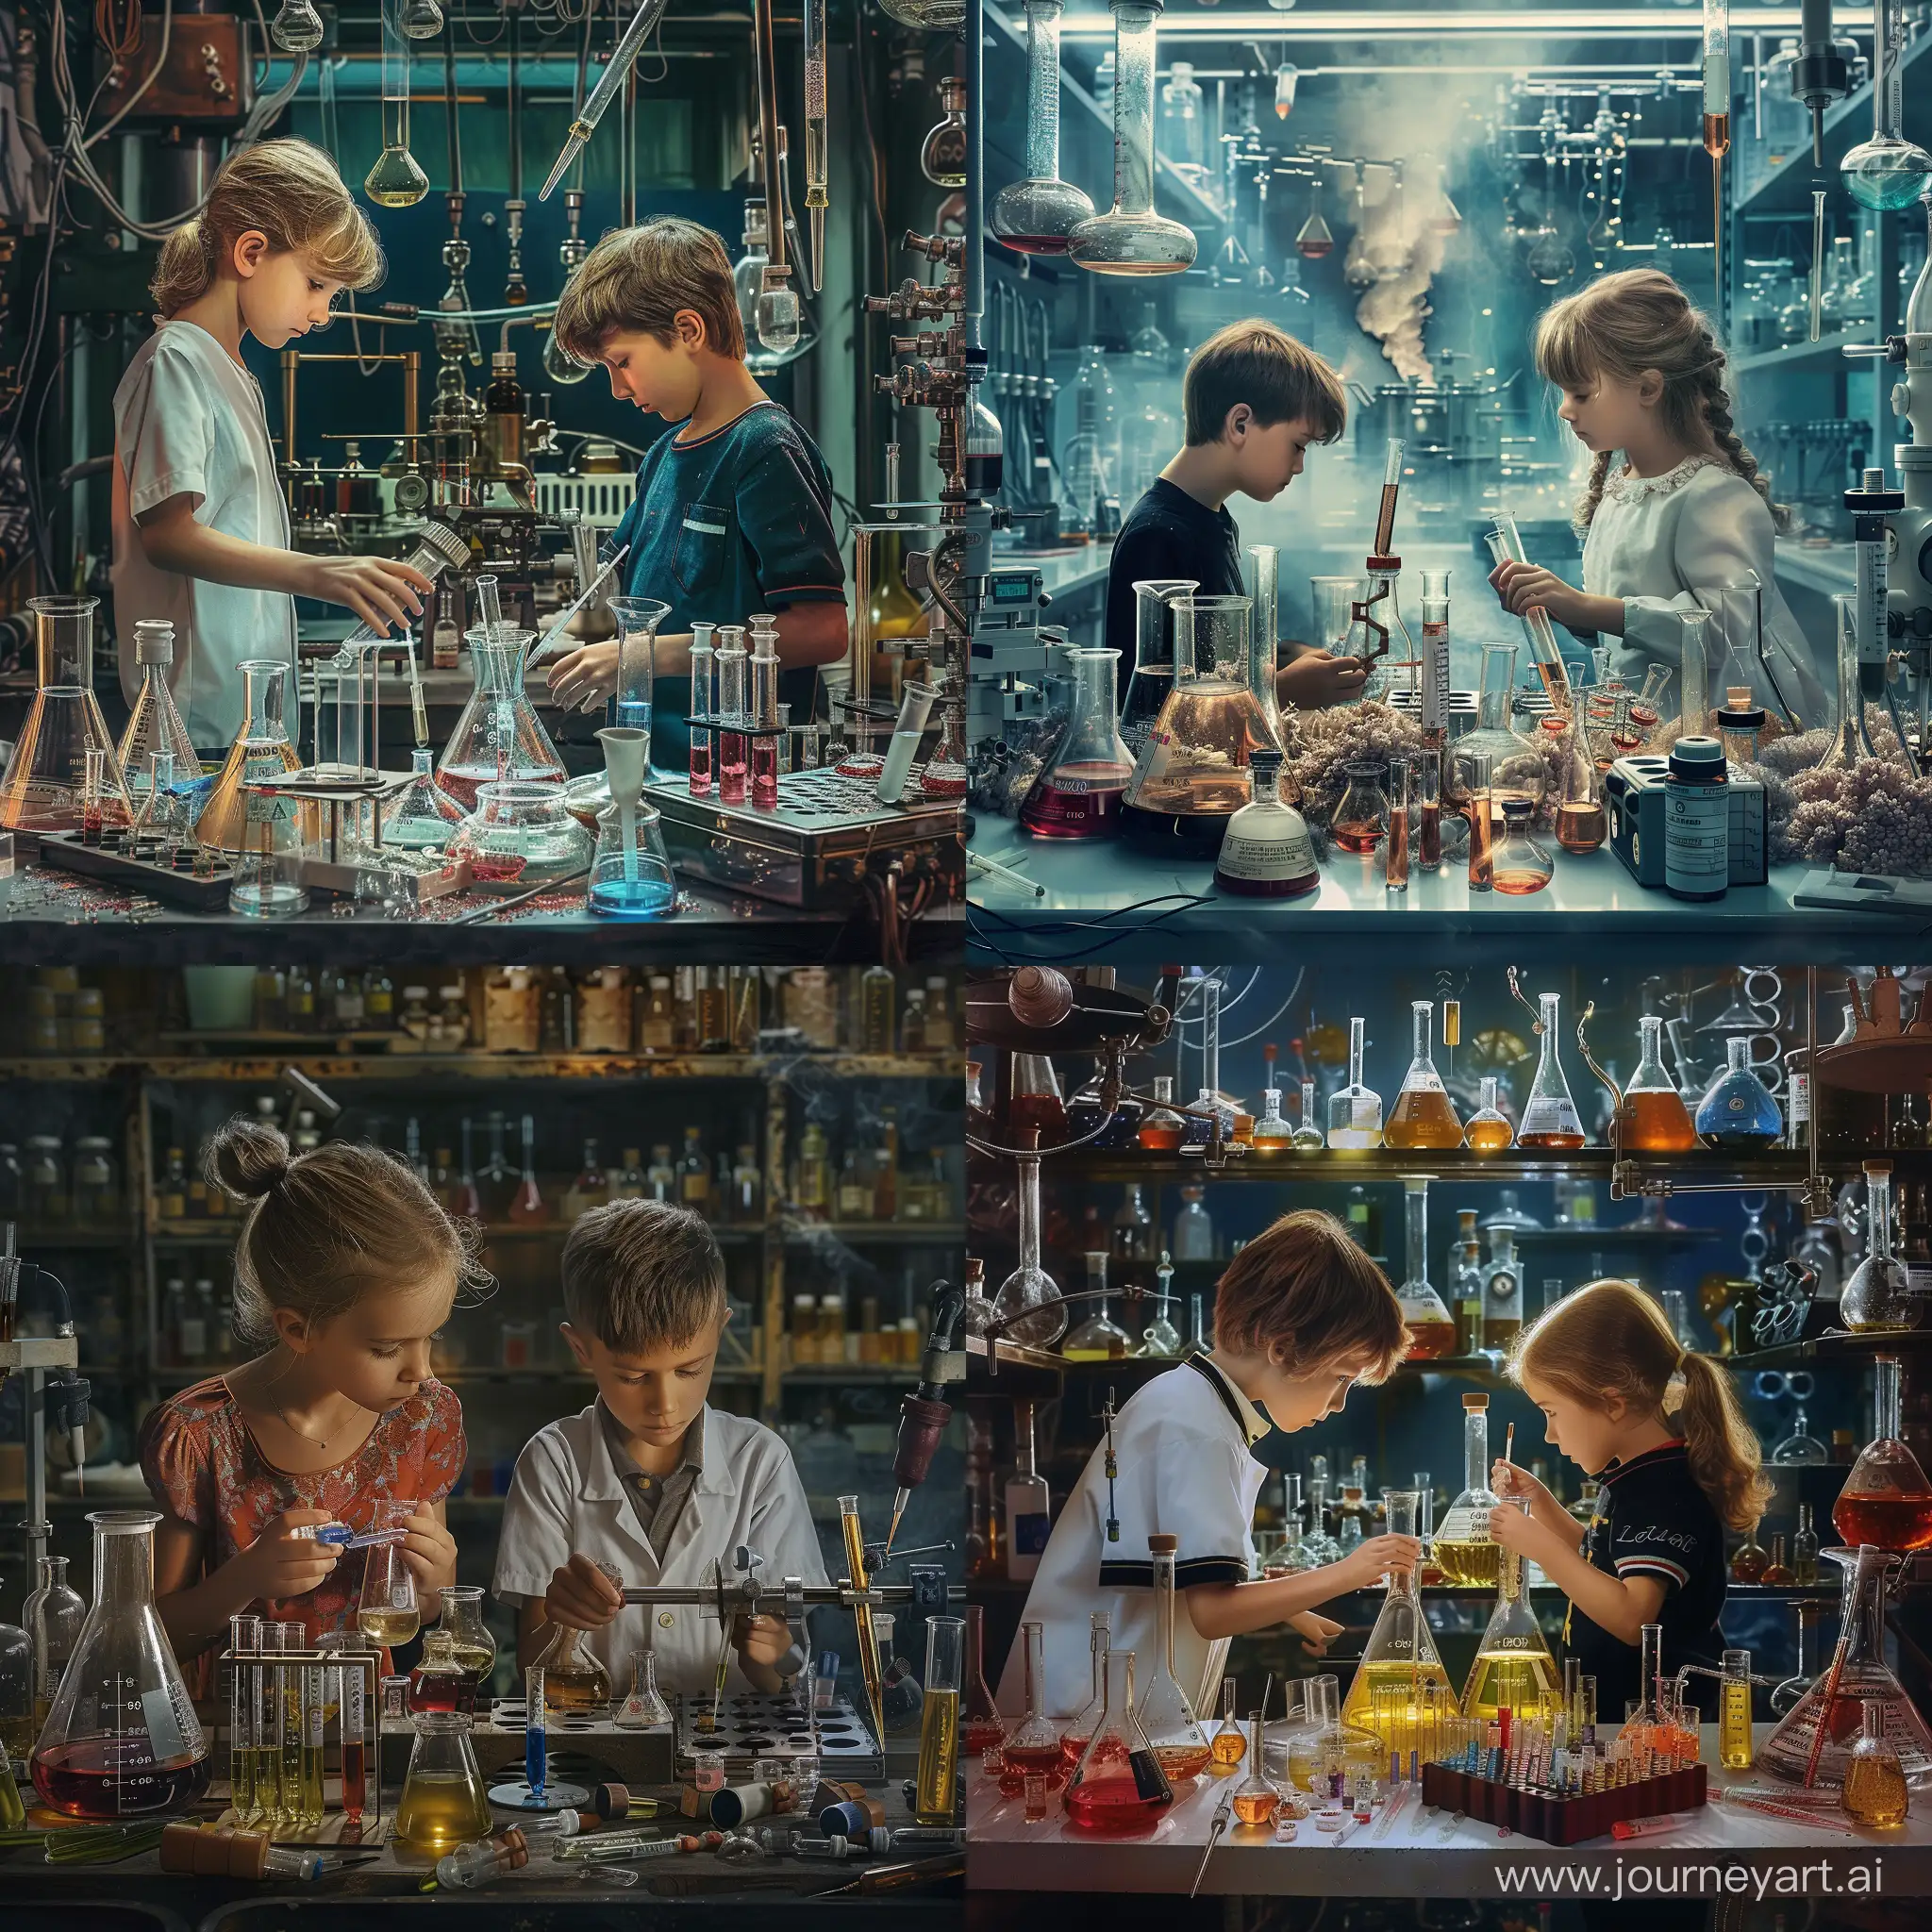 Curious-Kids-Conducting-Chemical-Experiments-in-HighResolution-Laboratory-Scene